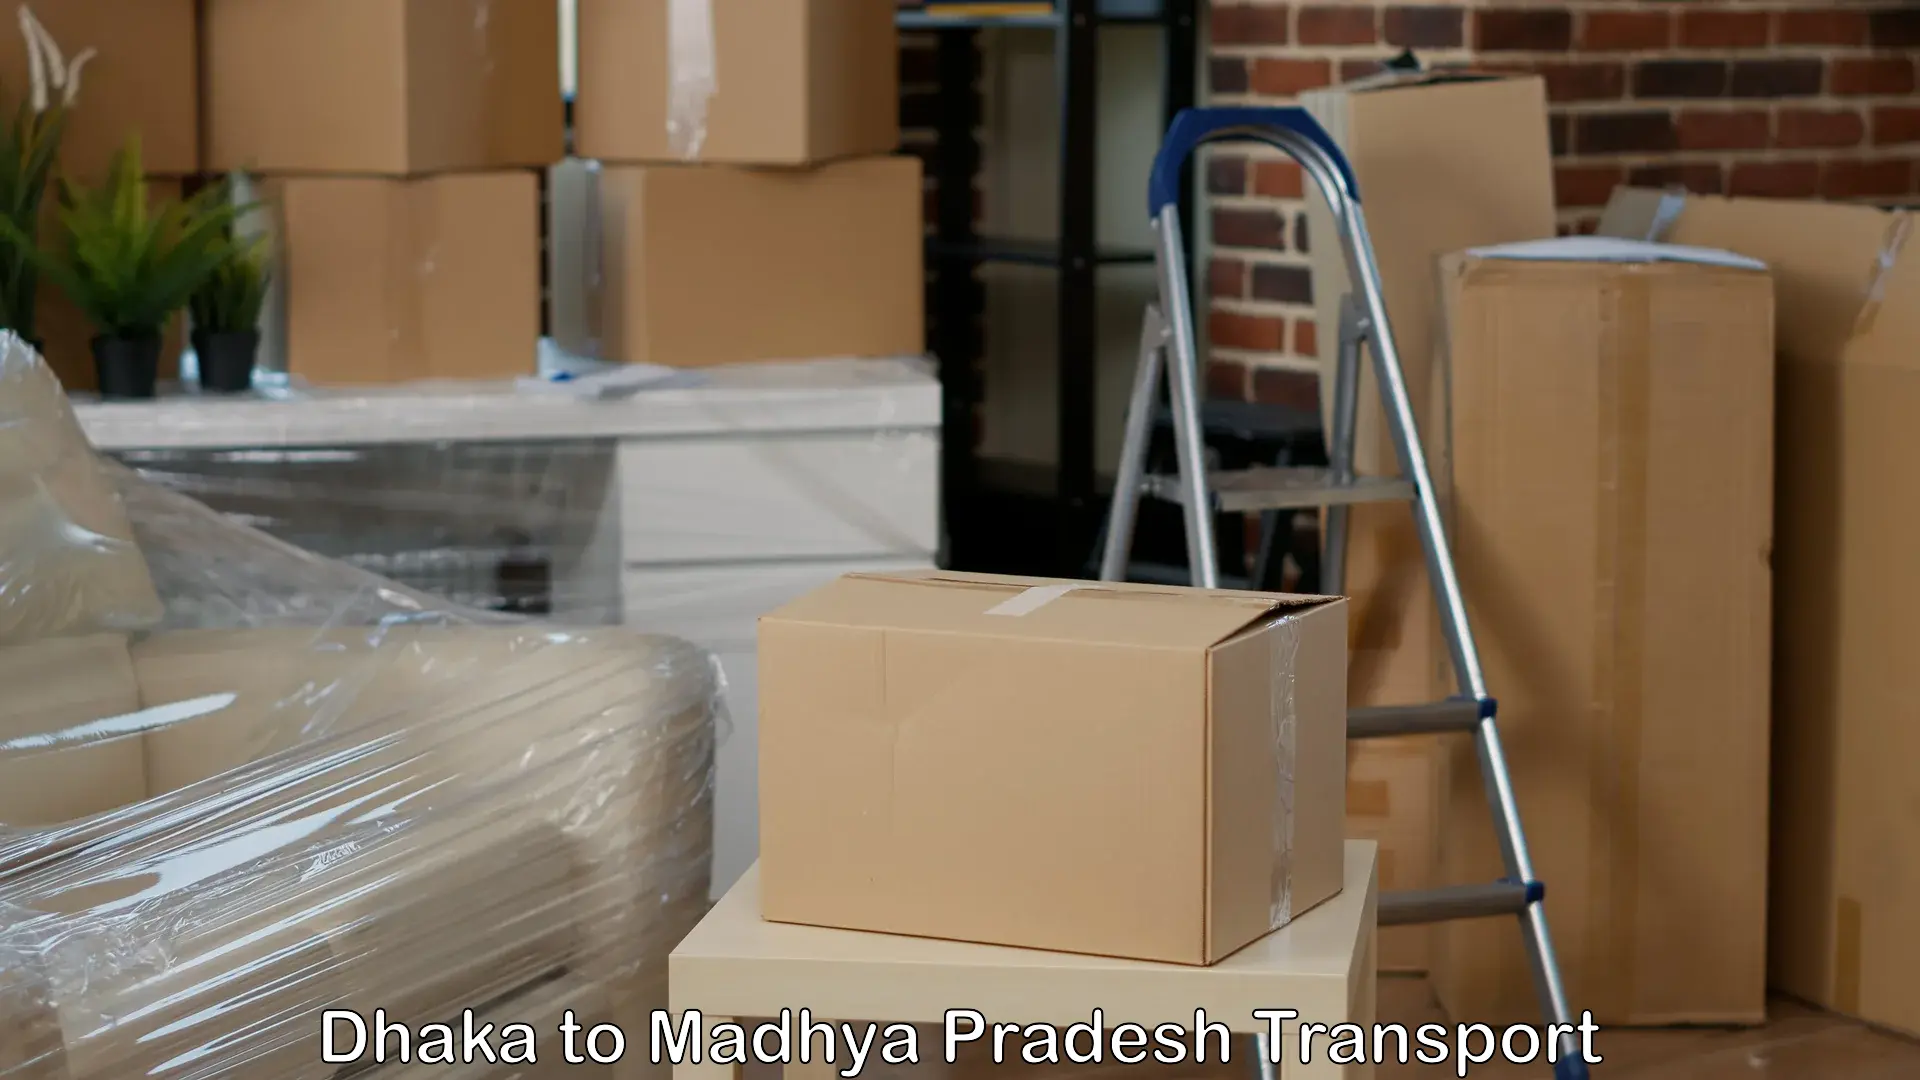 Truck transport companies in India Dhaka to Dola